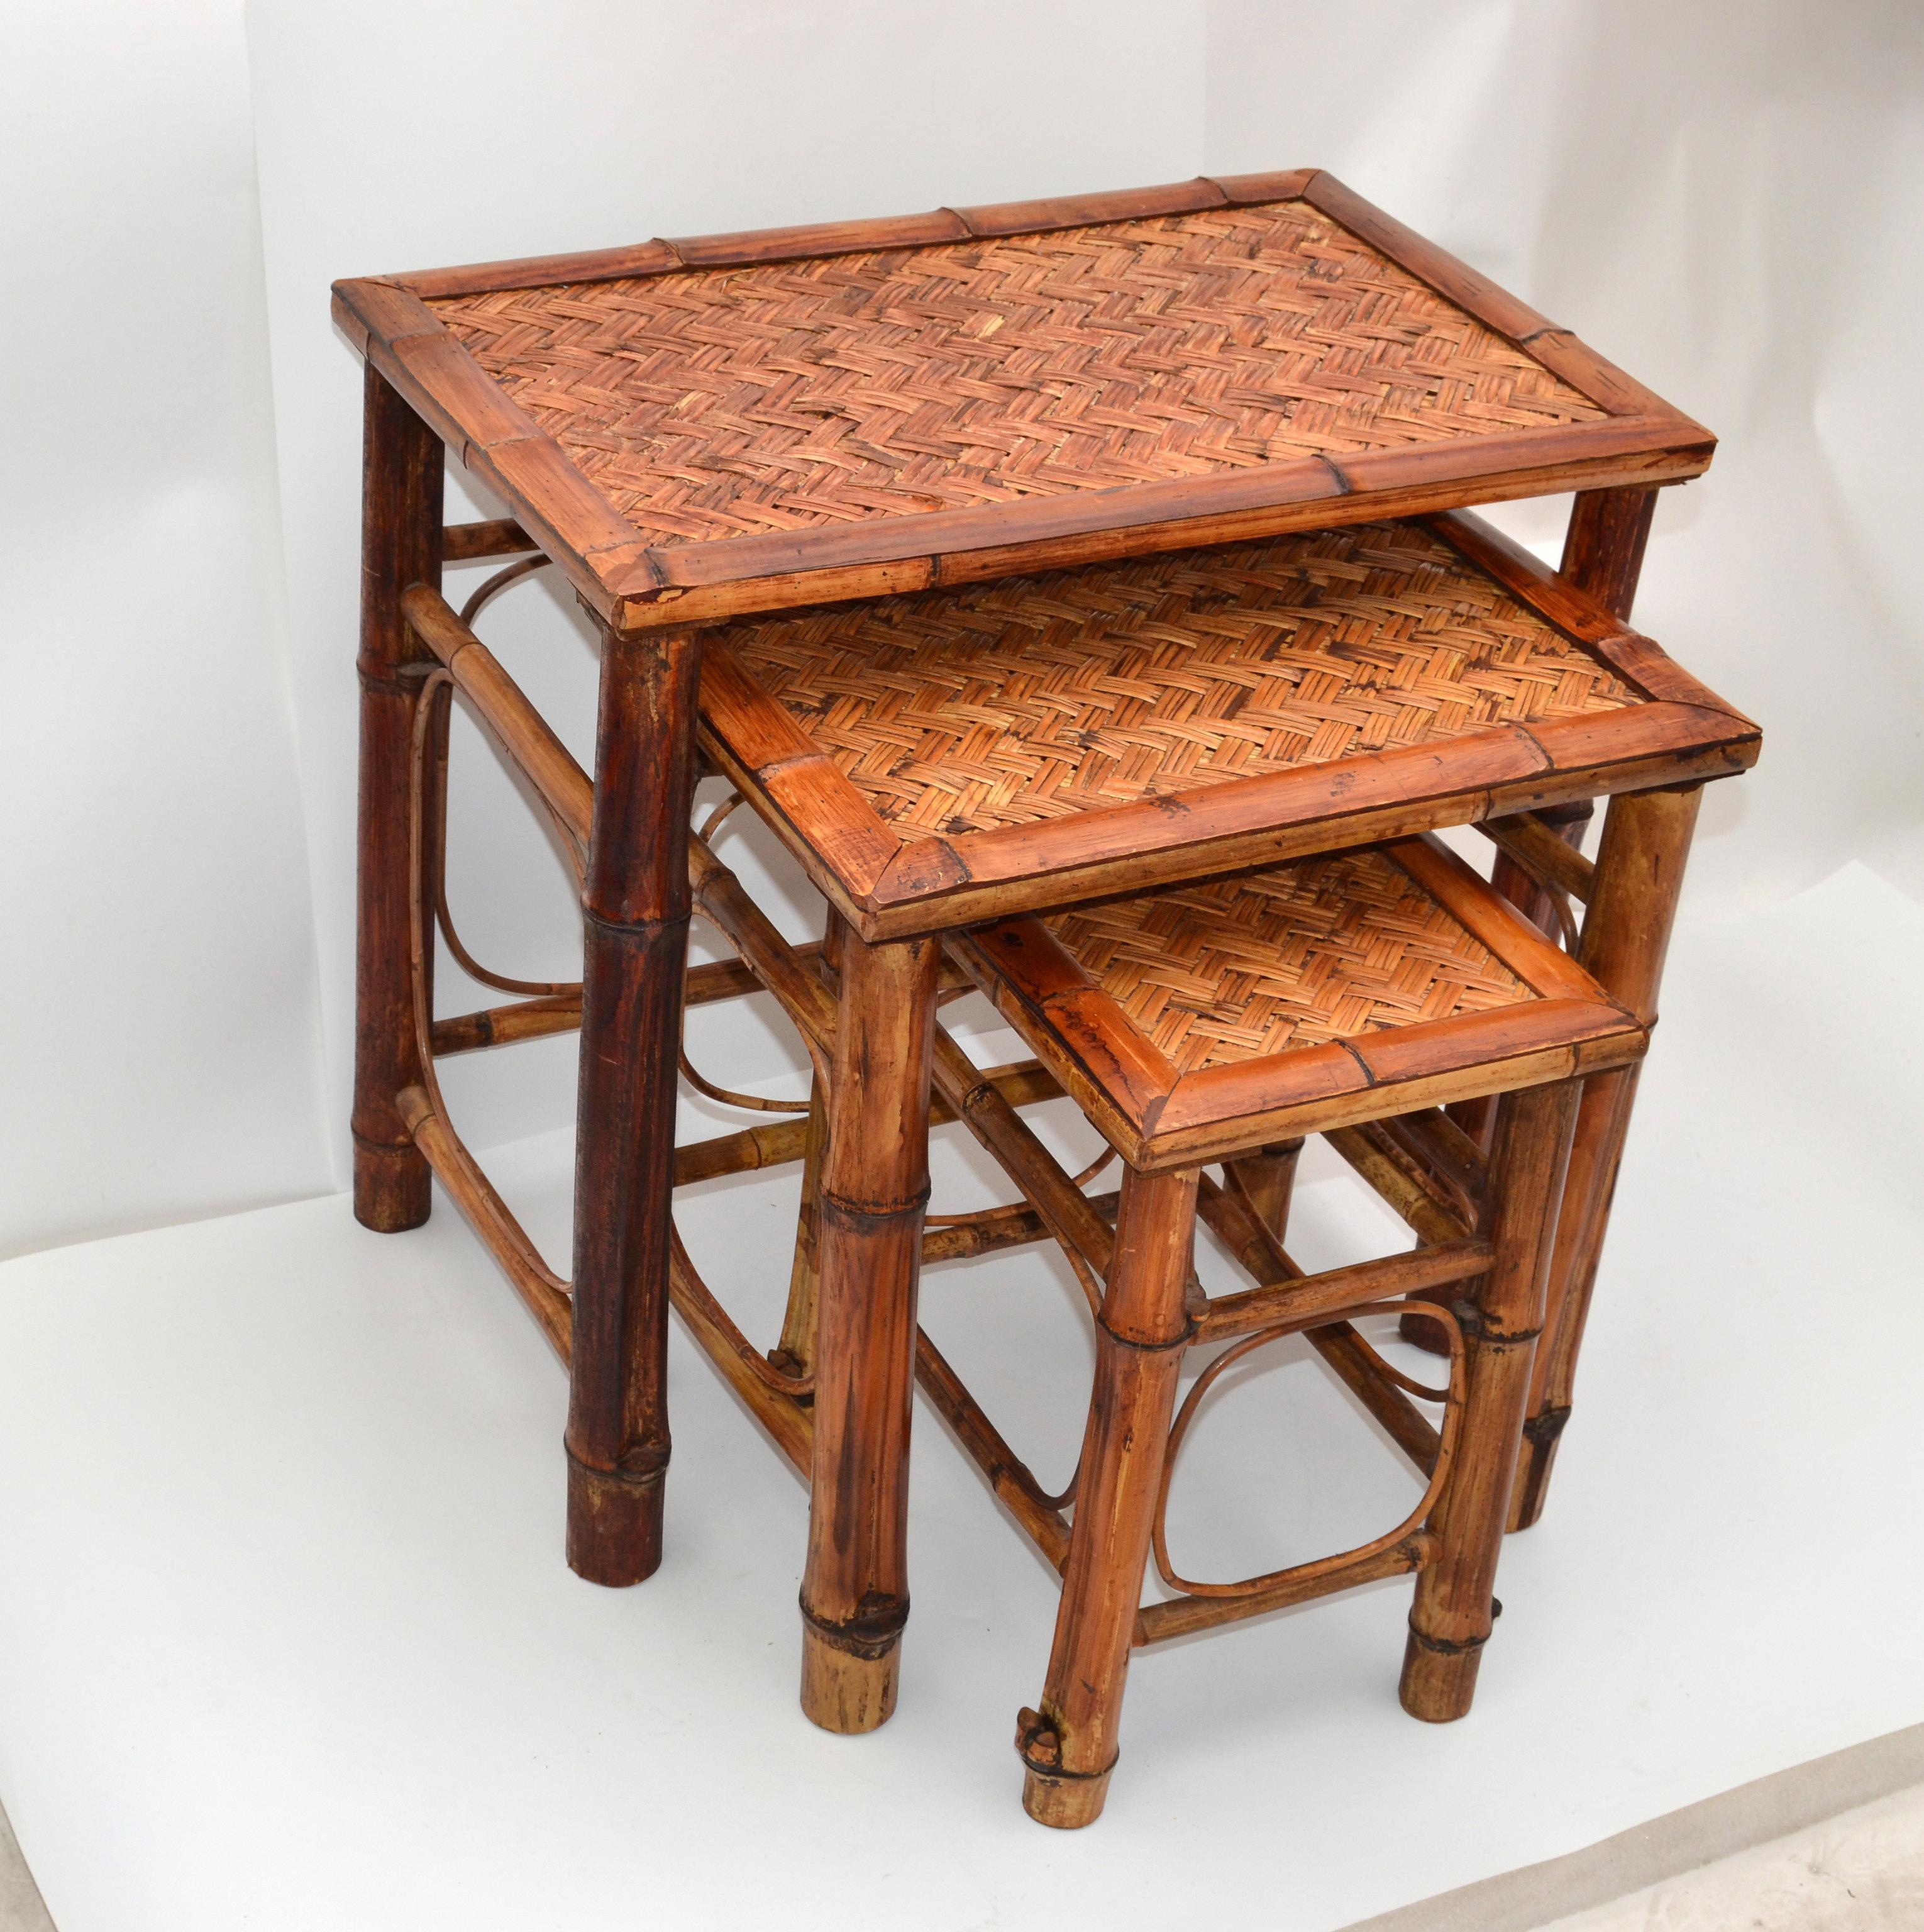 Chinoiserie Bamboo & Cane Nesting Tables Stacking Tables Handcrafted Set of 3 In Good Condition For Sale In Miami, FL